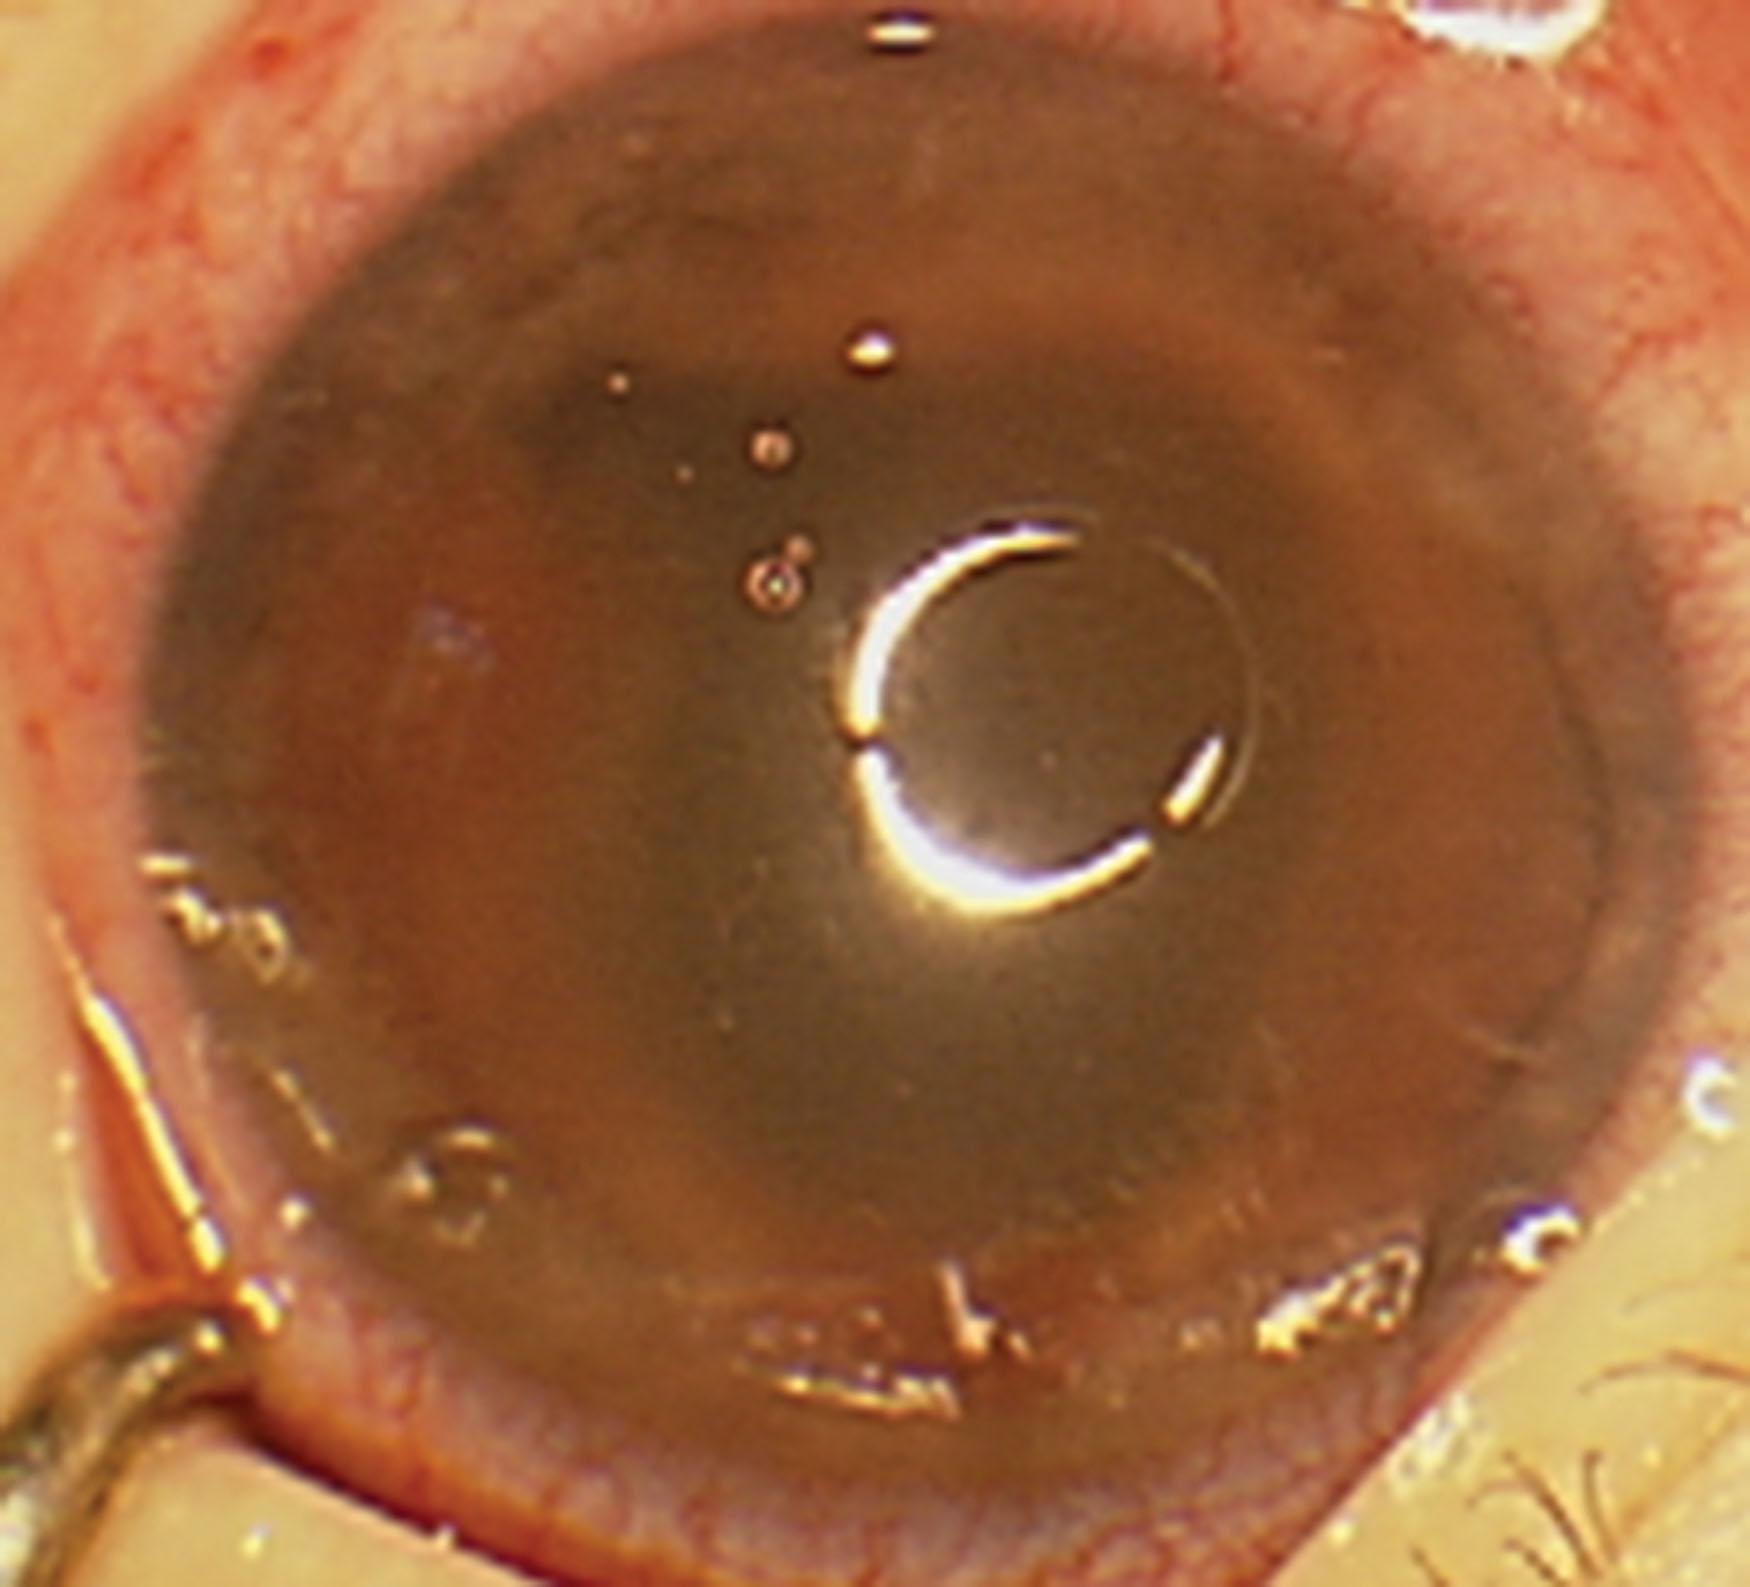 Fig. 37.5, Ectropion uveae in NF1. The iris peripheral to the ectropion has a flat surface with loss of crypts suggestive of membrane which may also occlude the angle in that meridian.